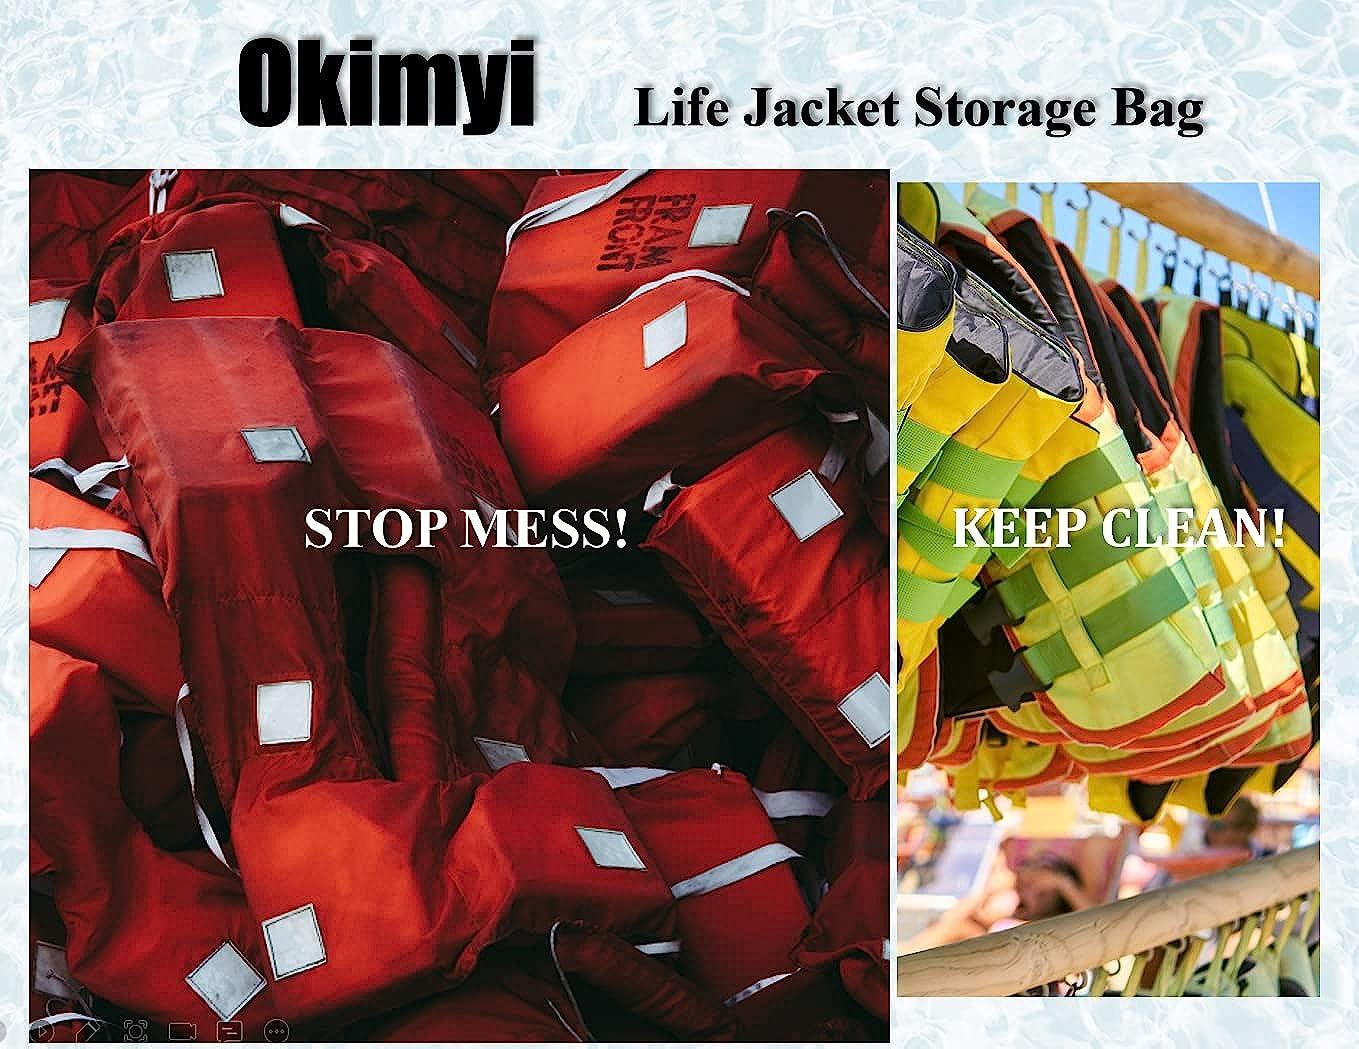 Boat T-Top Storage Bag for 6 Type II Life Jackets Life Vests